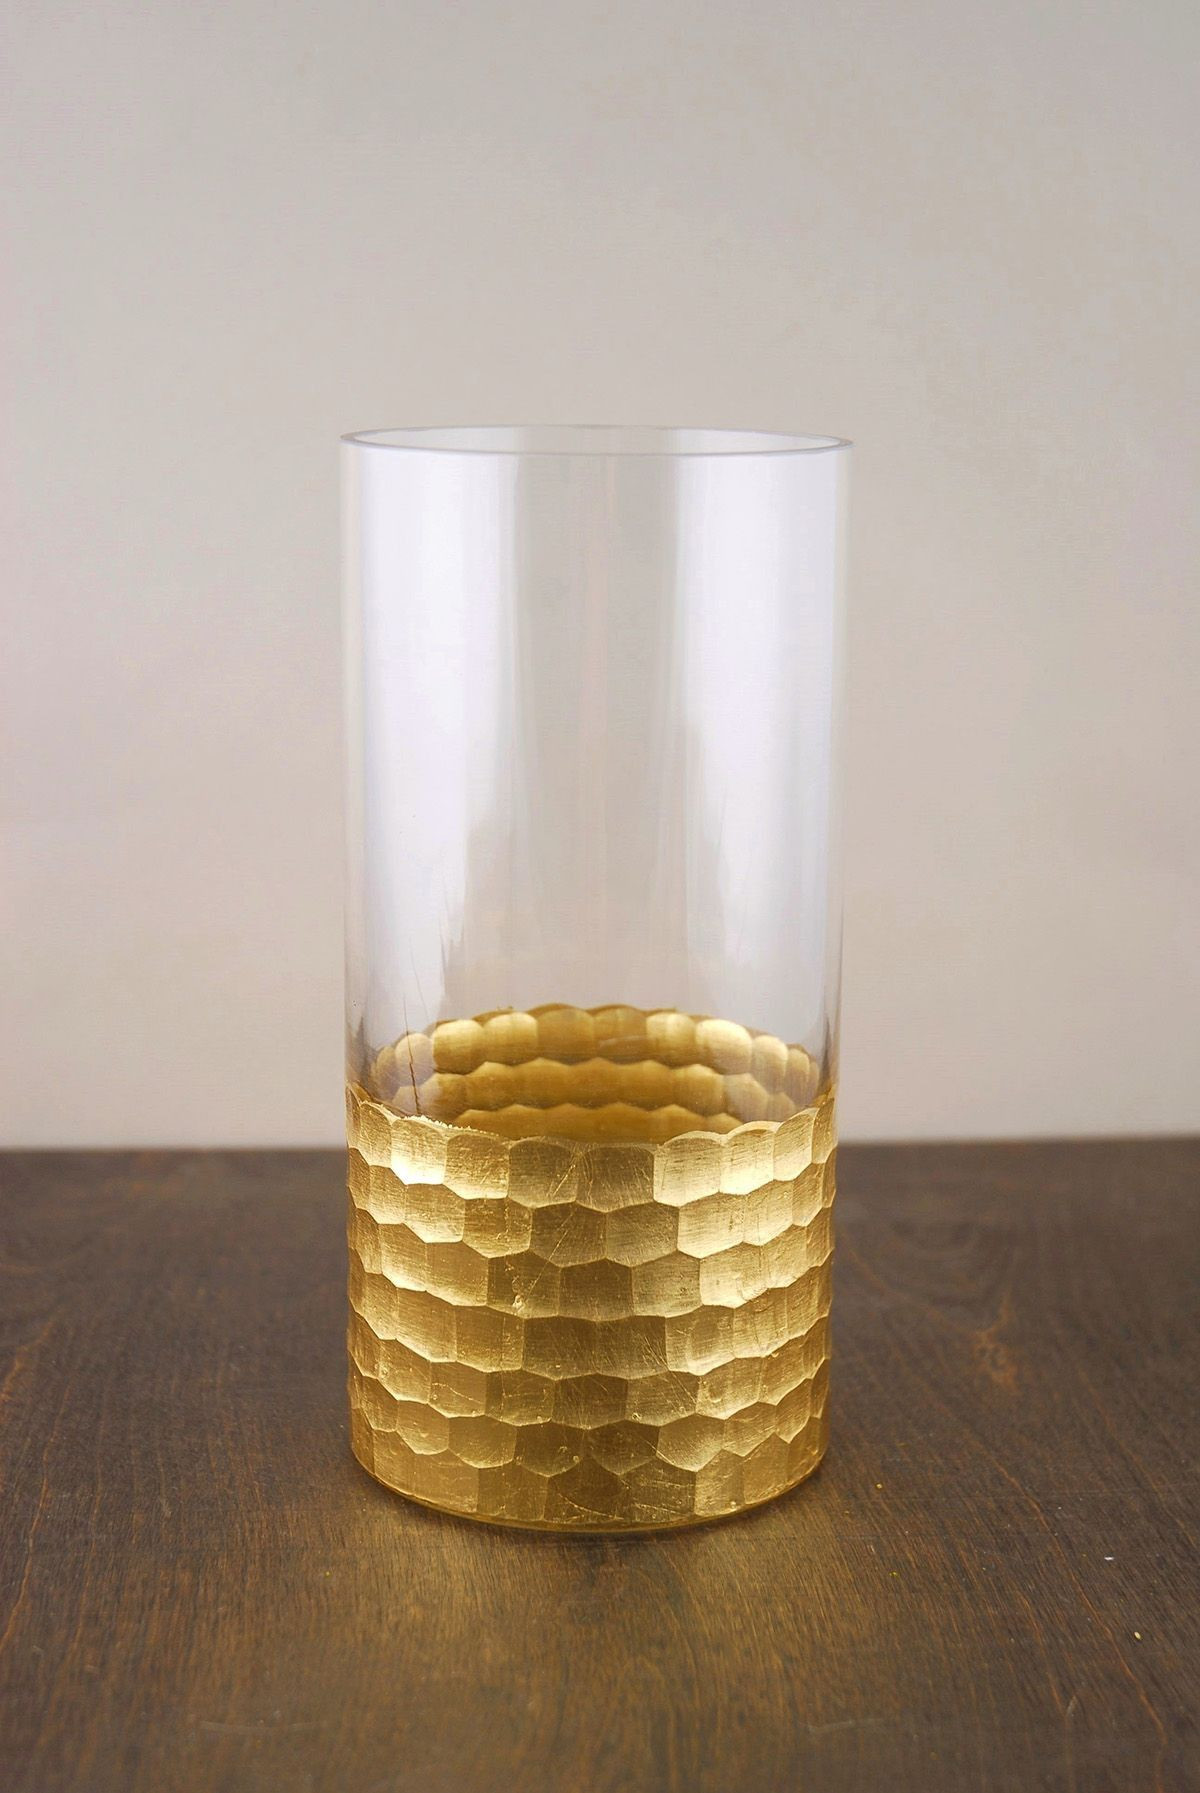 10 Recommended Large Cylinder Vases Cheap 2024 free download large cylinder vases cheap of gold mercury glass vases inspirational gold cylinder vases with regard to gold mercury glass vases inspirational gold cylinder vases collection silver and gold 